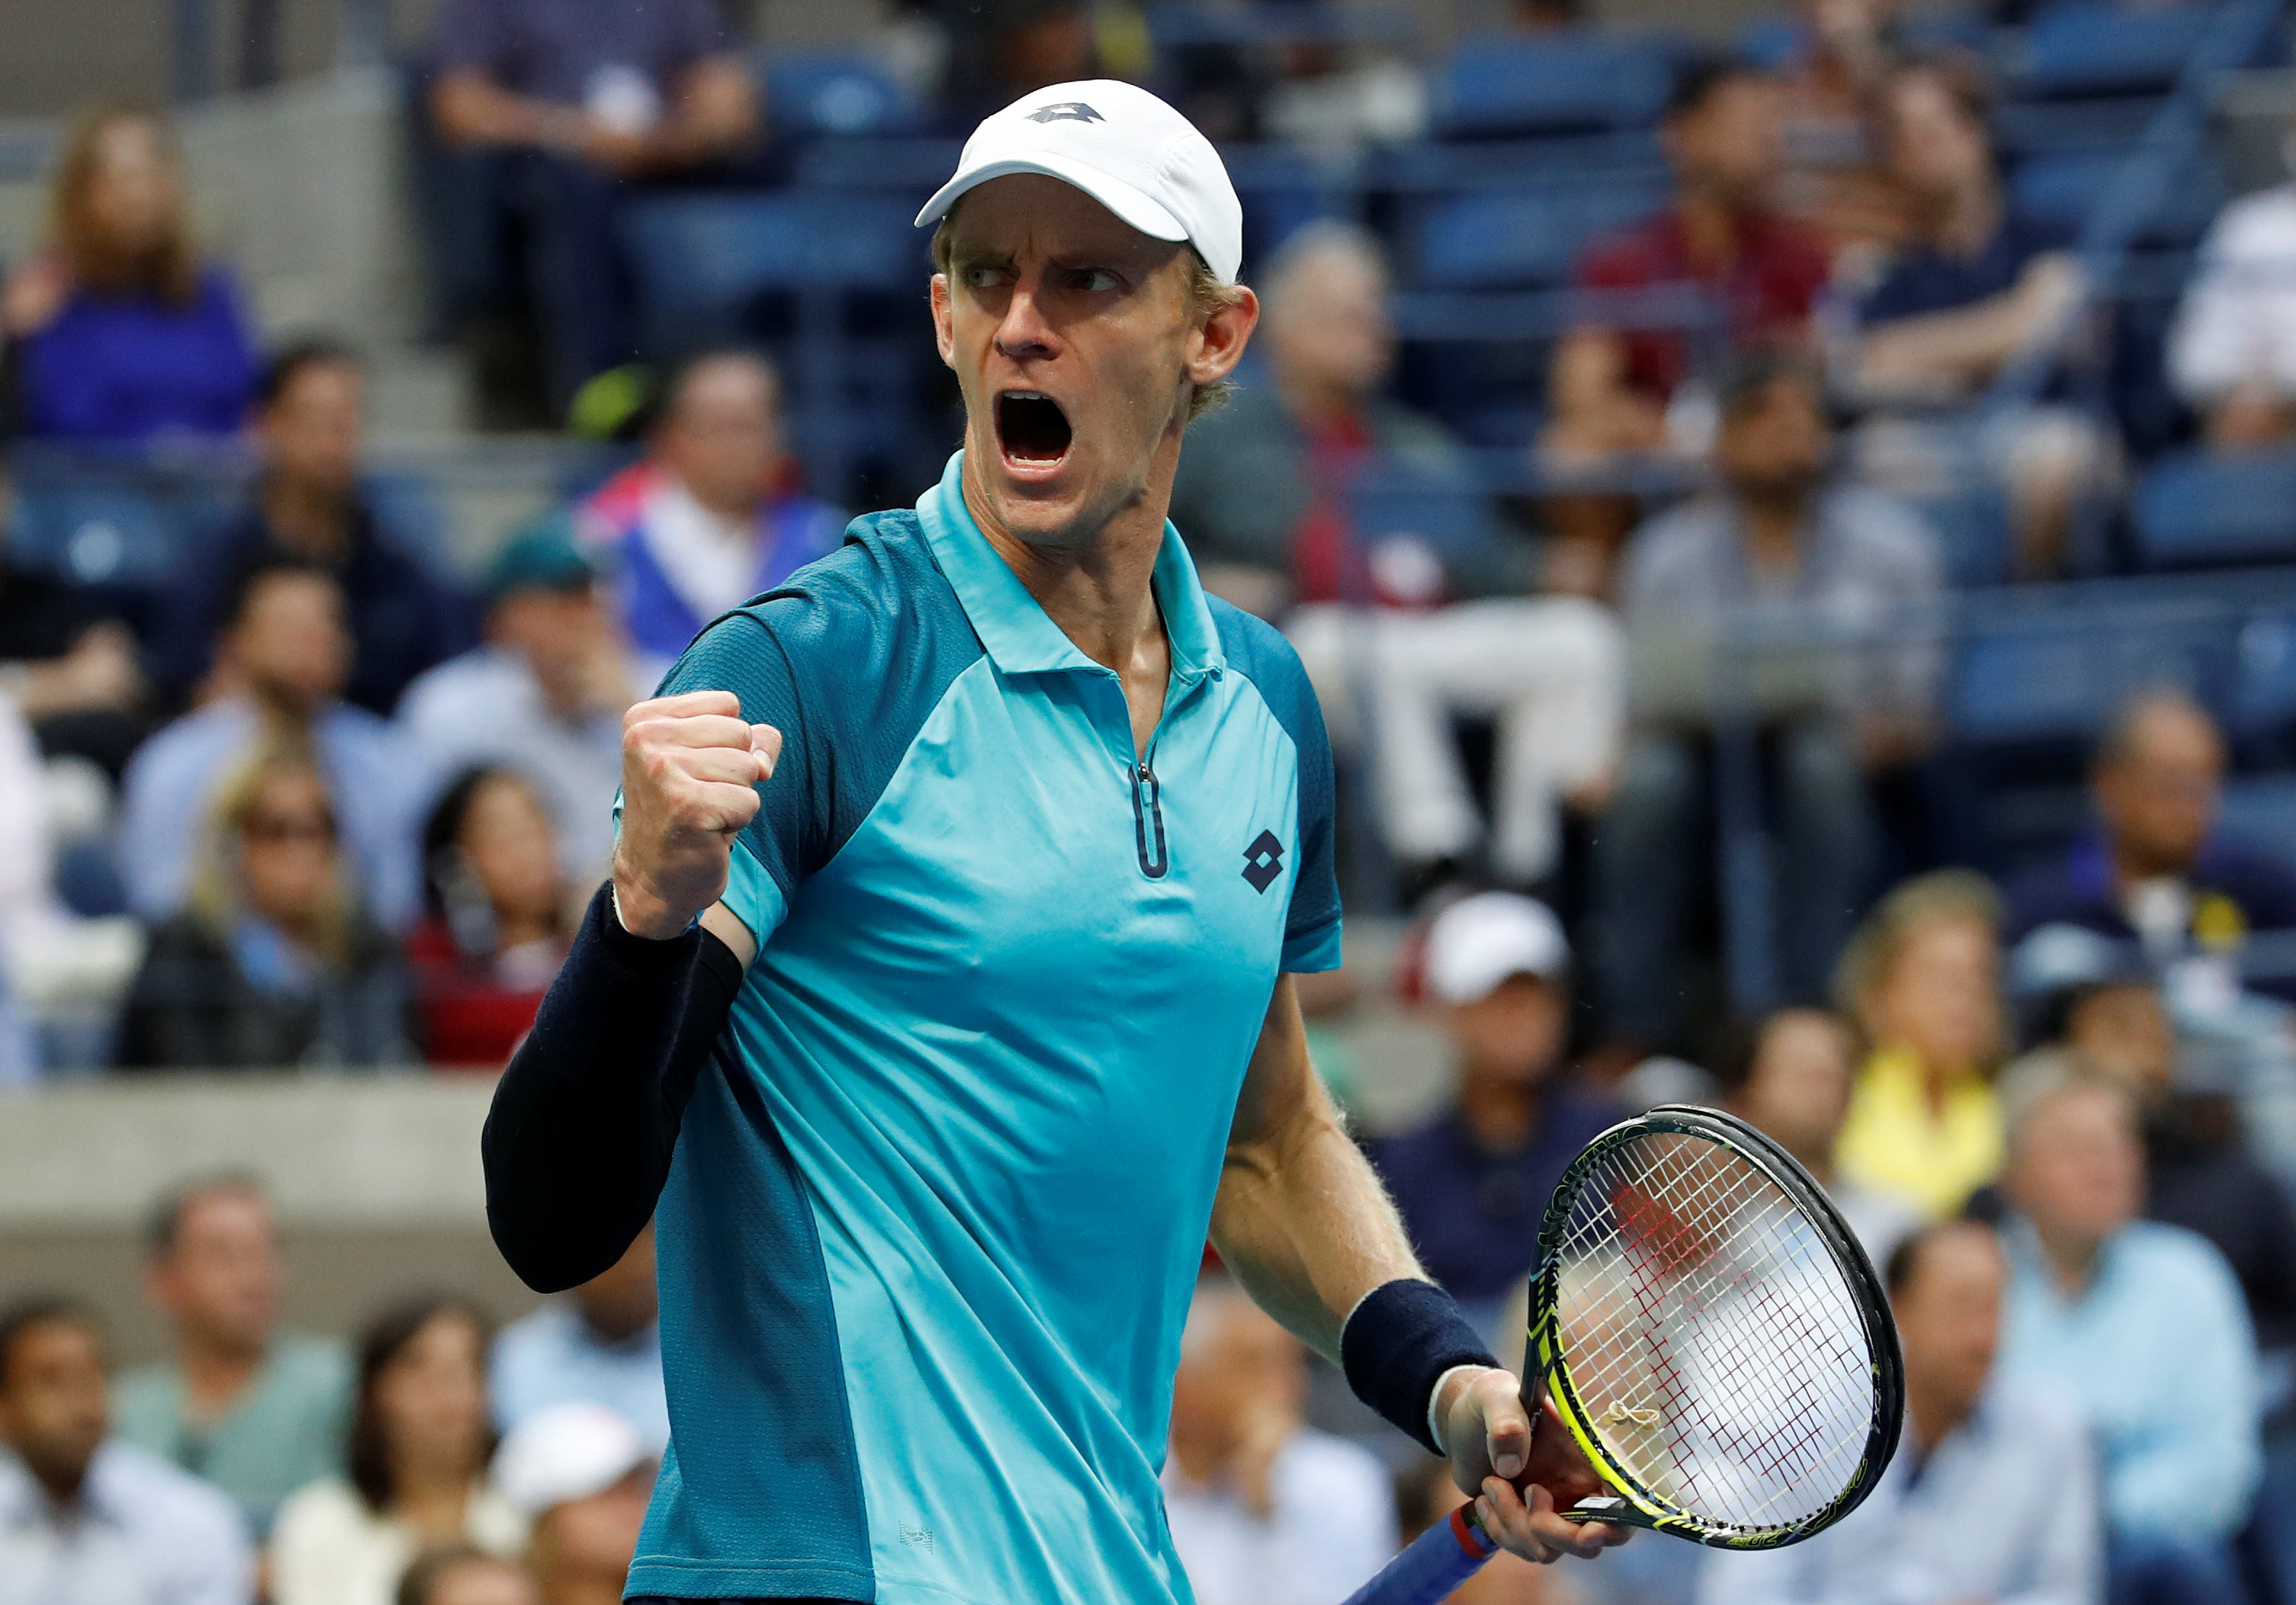 Tennis: Kevin Anderson reaps rewards for perseverance and dedication